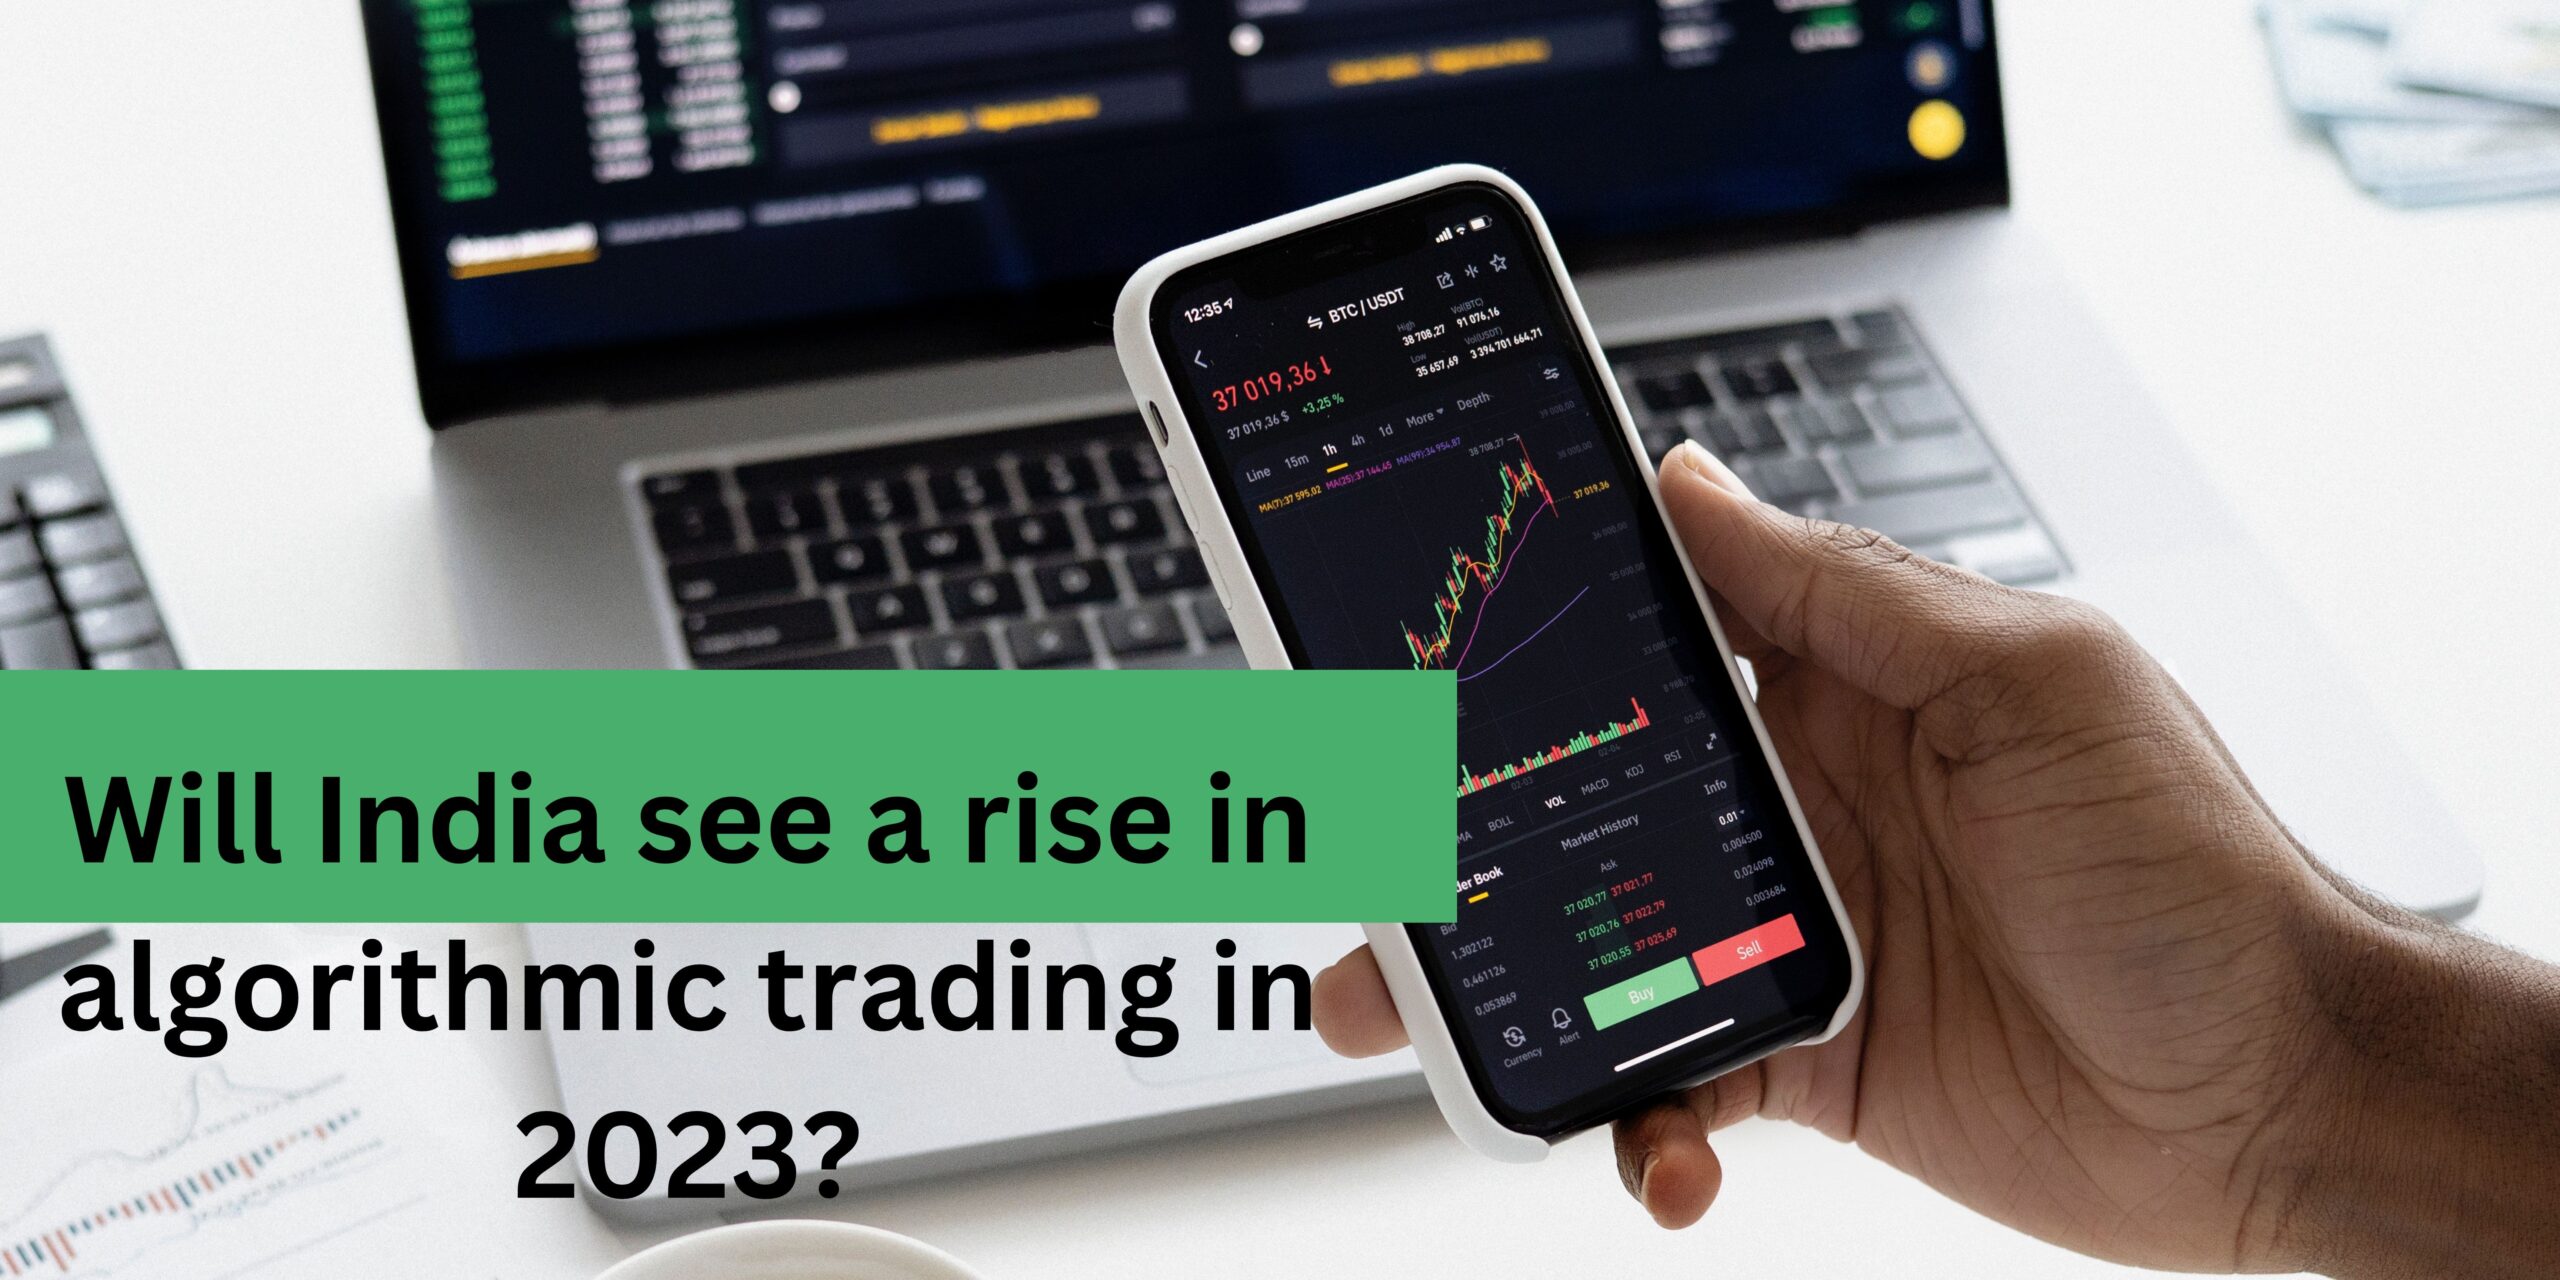 Will India see a rise in algorithmic trading in 2023?